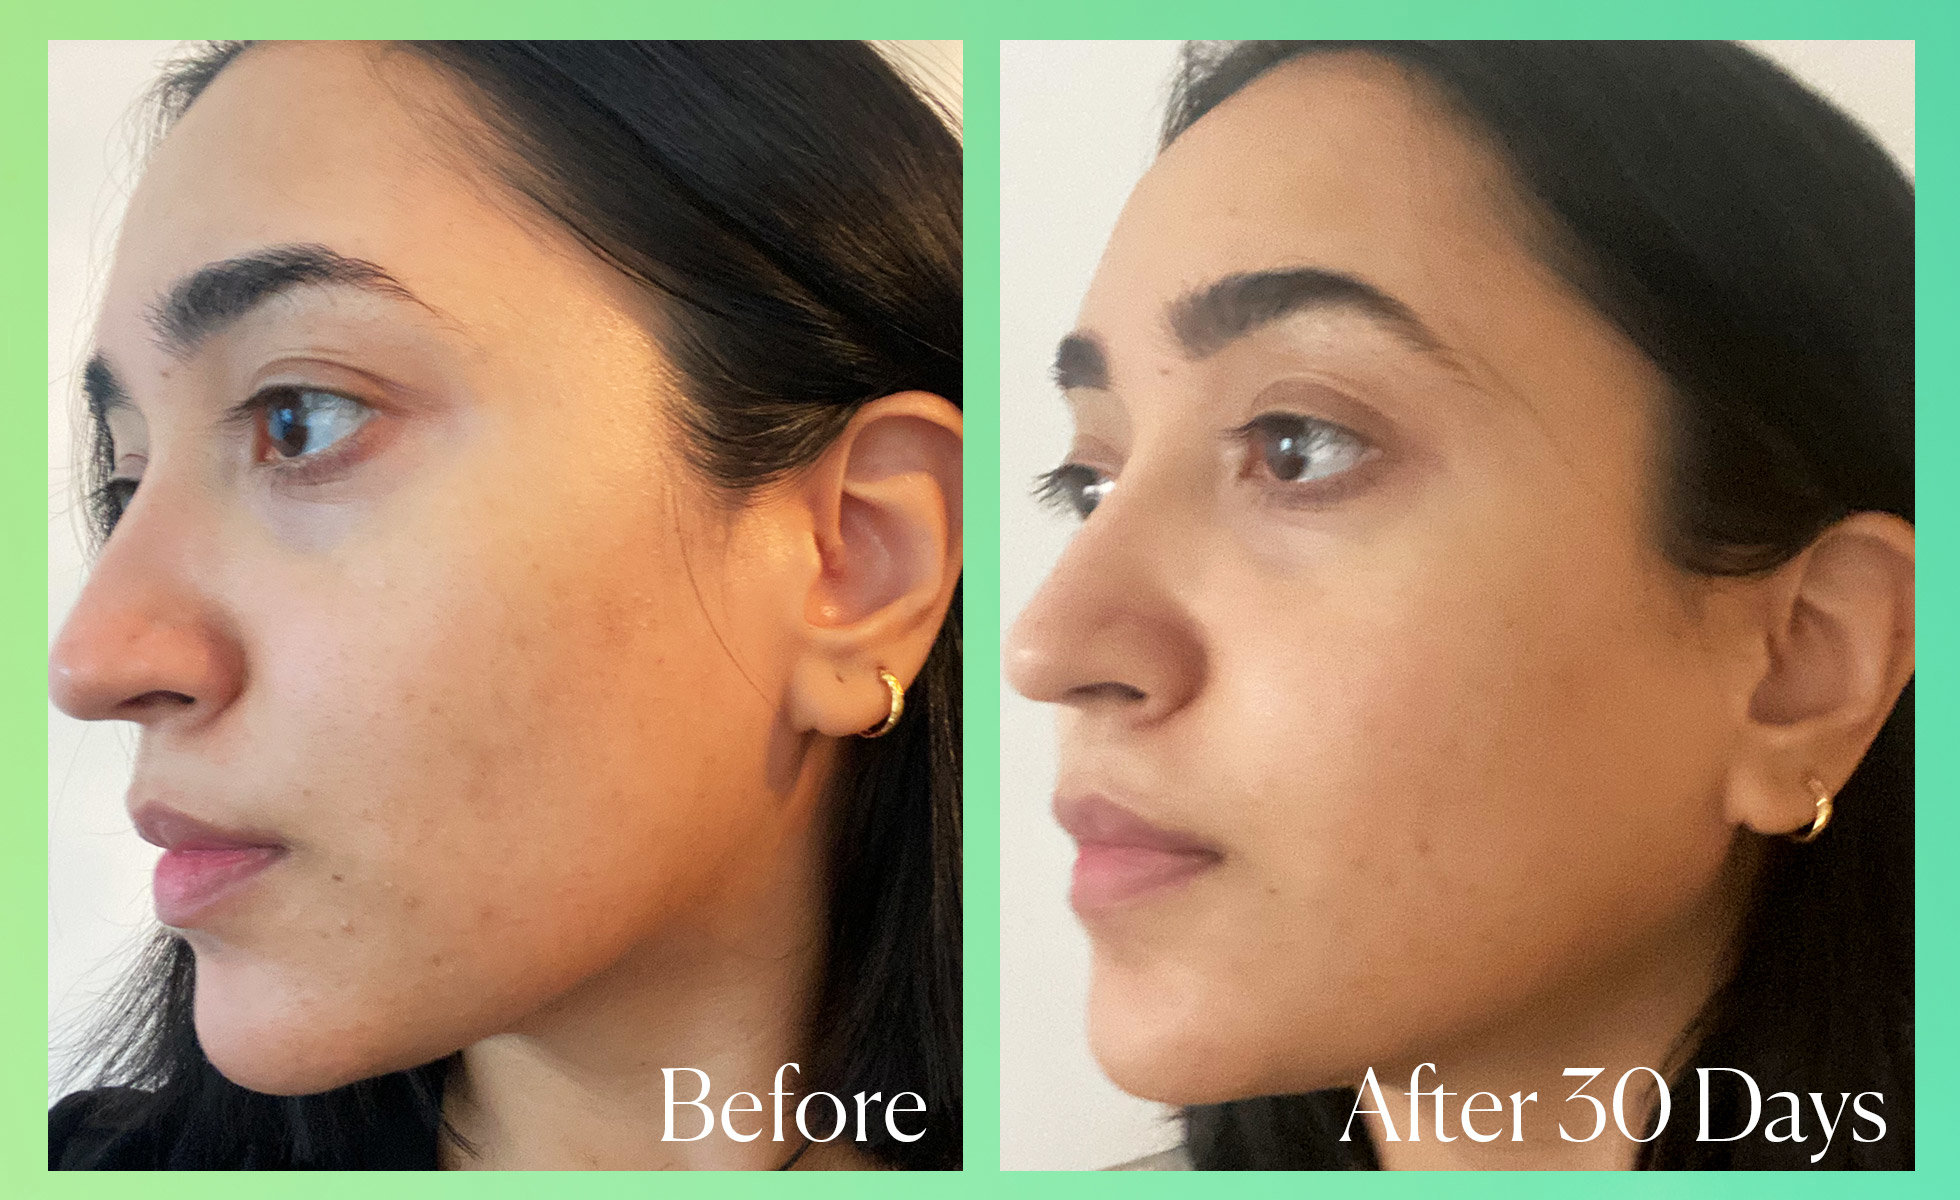 Nurain’s results after 30 days of using Good Molecules Discoloration Correcting Serum.